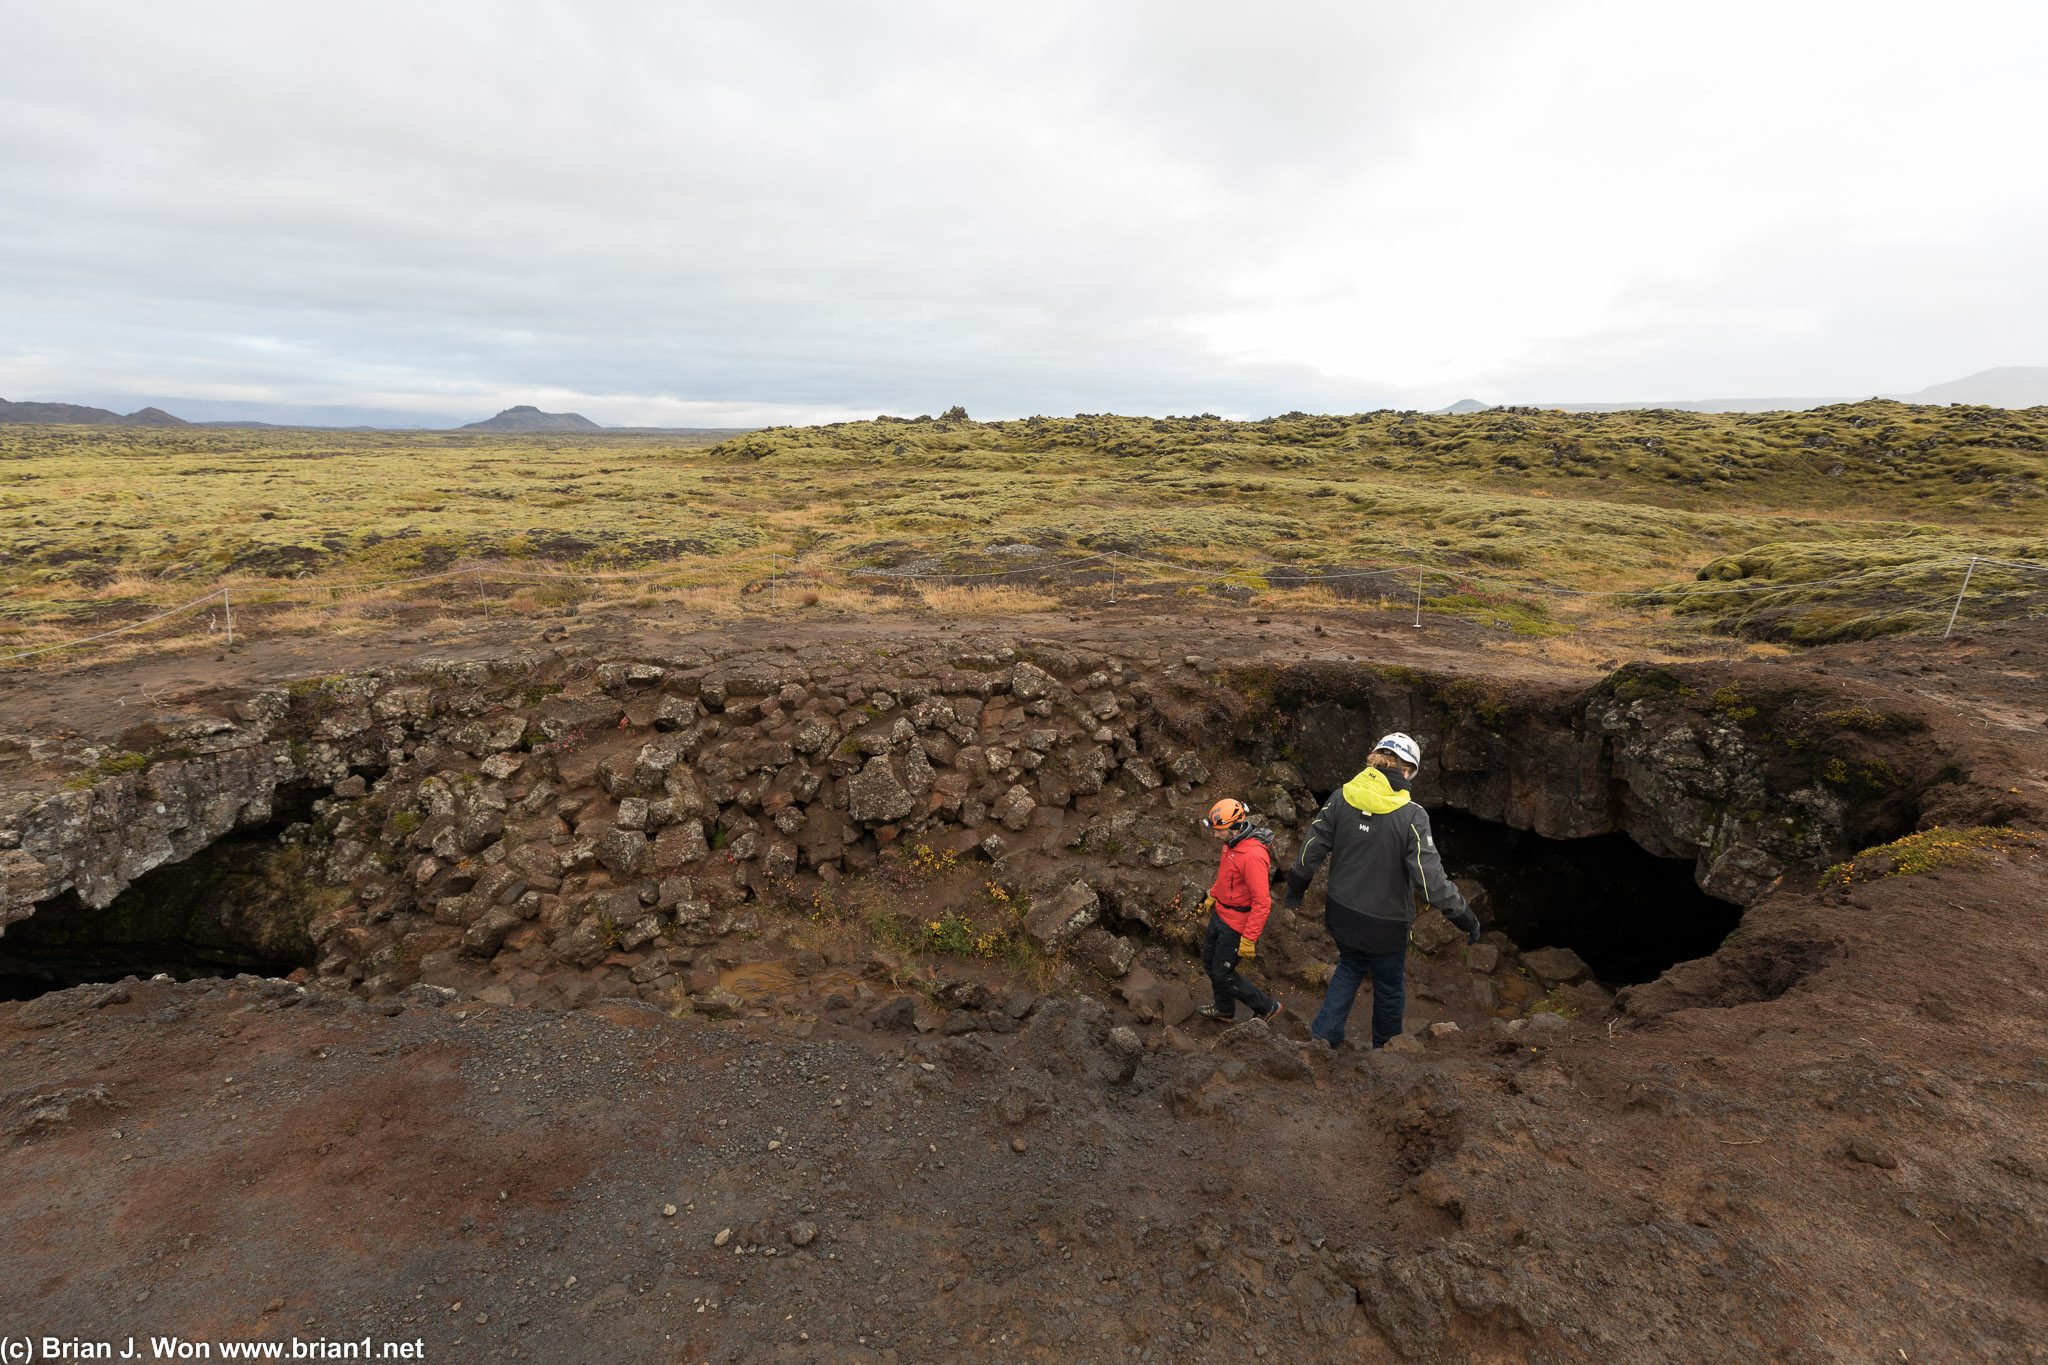 About to enter Leidarendi lava tube, one of the longest lava tubes in Iceland at nearly a kilometer in length.